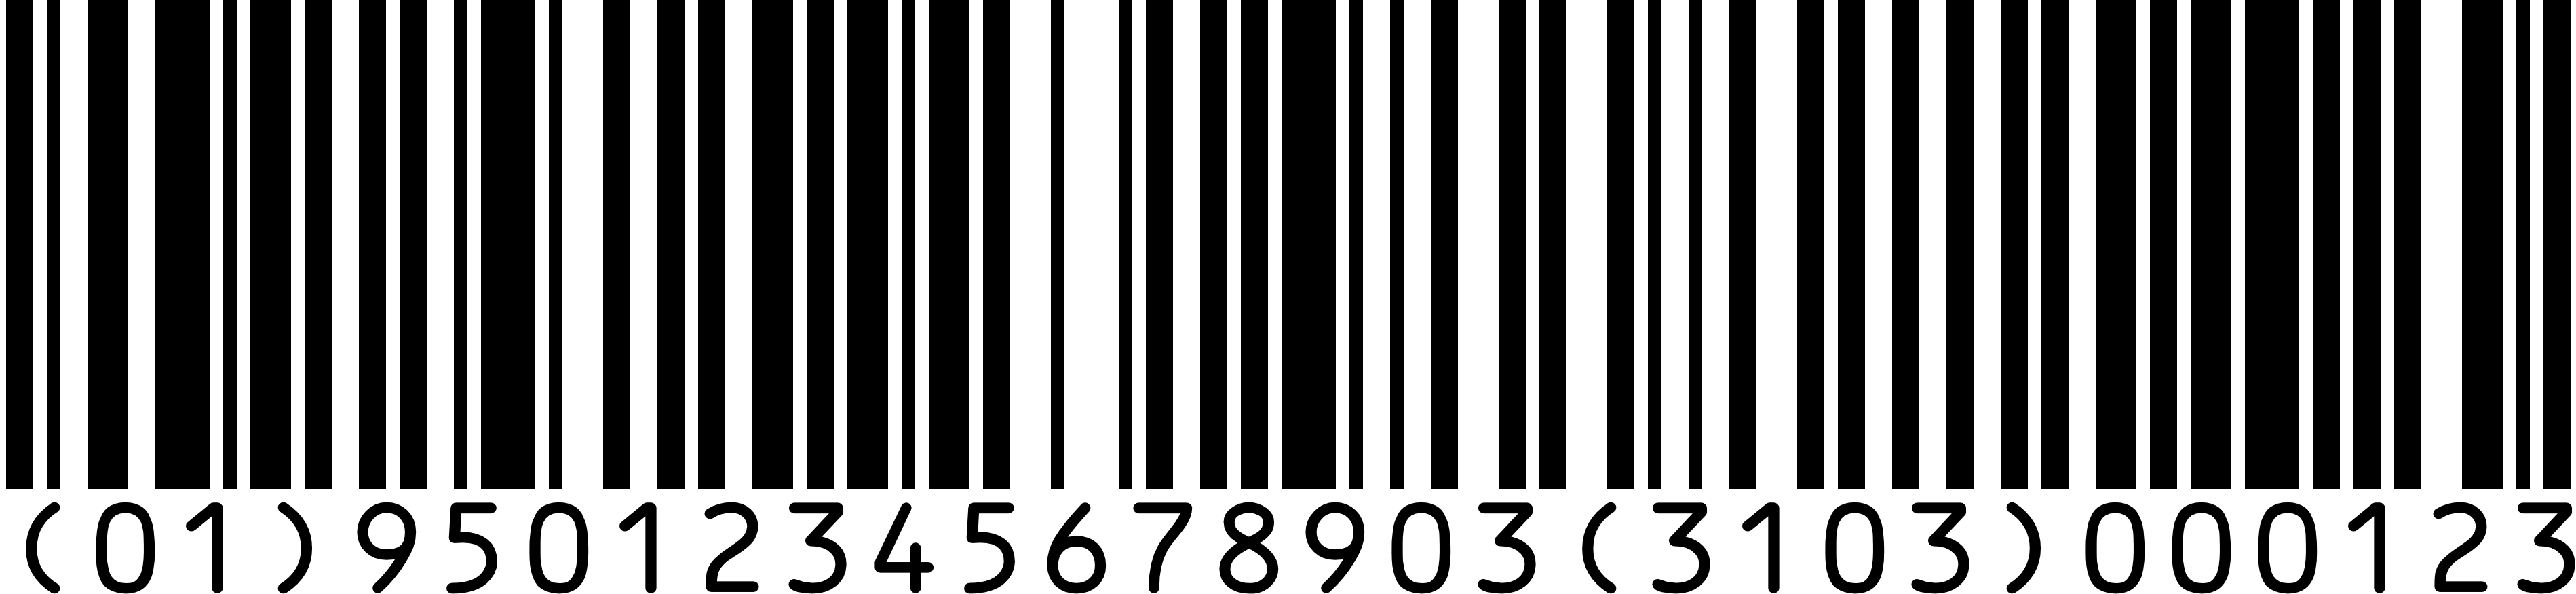 Example of GS1-128 Barcode